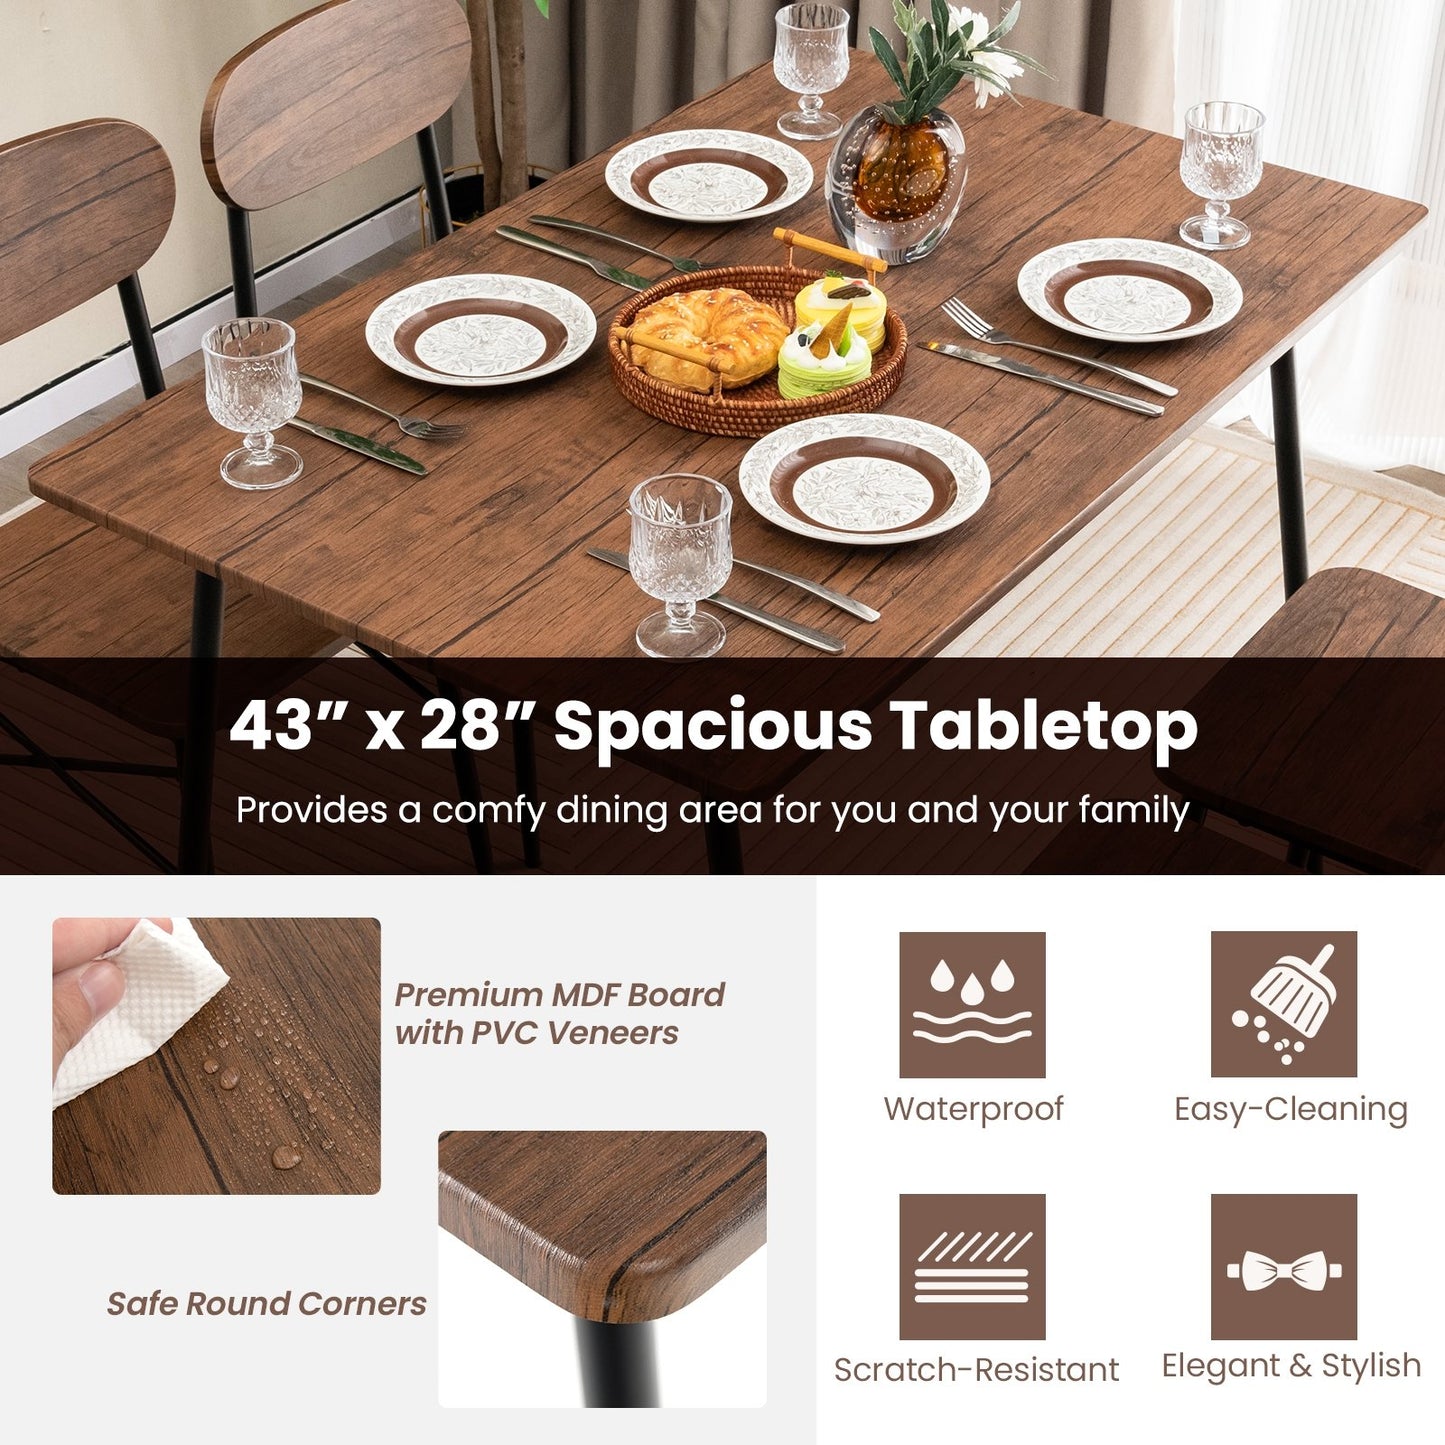 5 Piece Dining Table Set Rectangular with Backrest and Metal Legs for Breakfast Nook, Rustic Brown